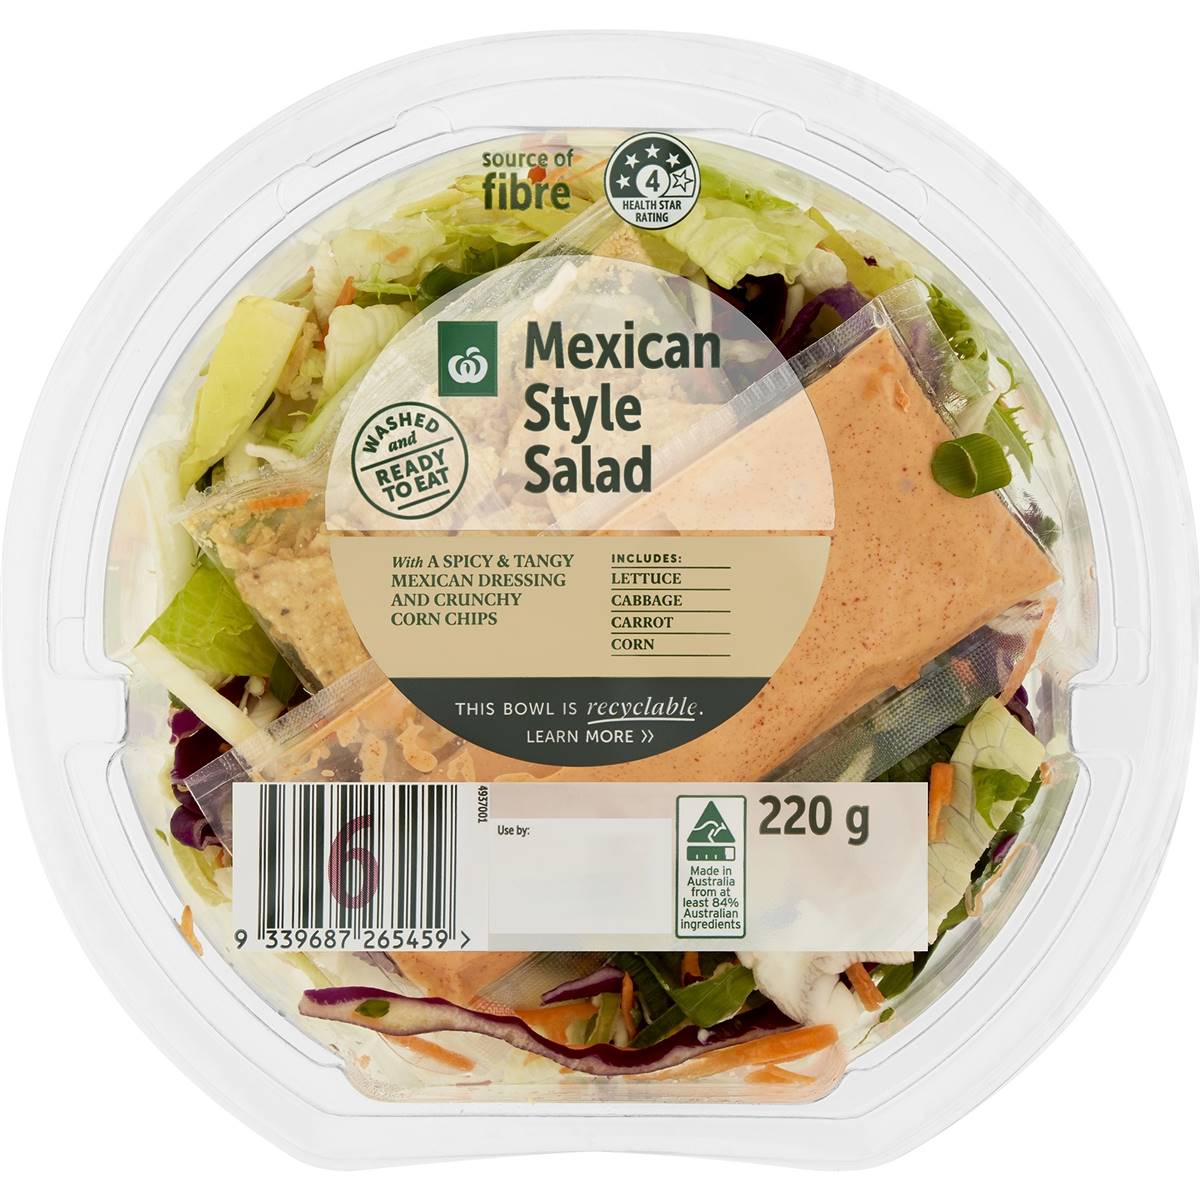 Calories in Woolworths Mexican Style Salad Bowl